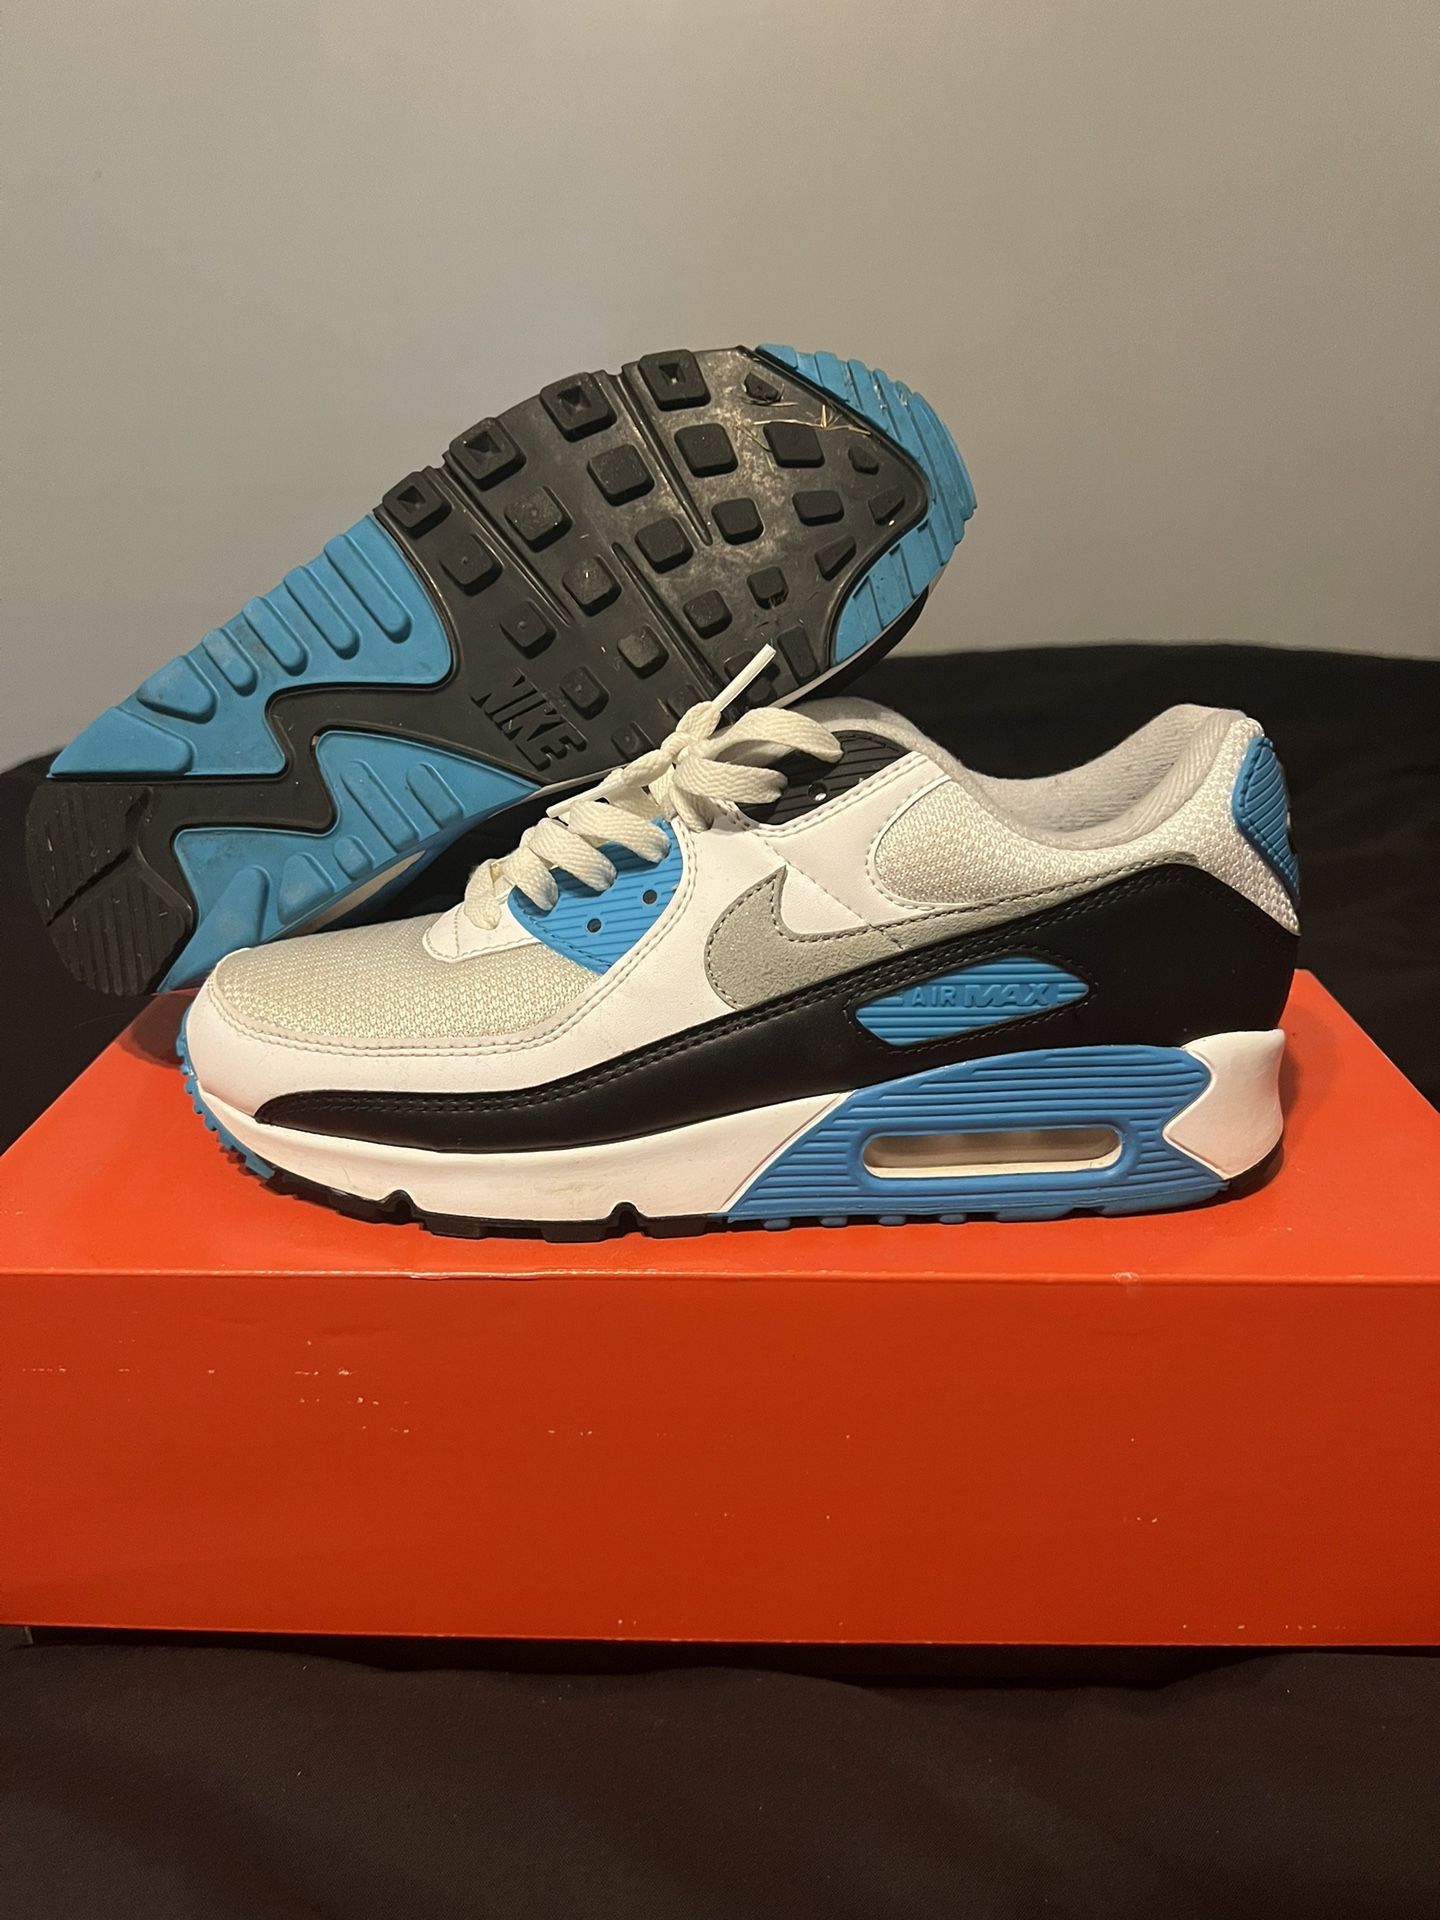 Airmax 90 ‘Laser Blue’ size 9 (send offers)